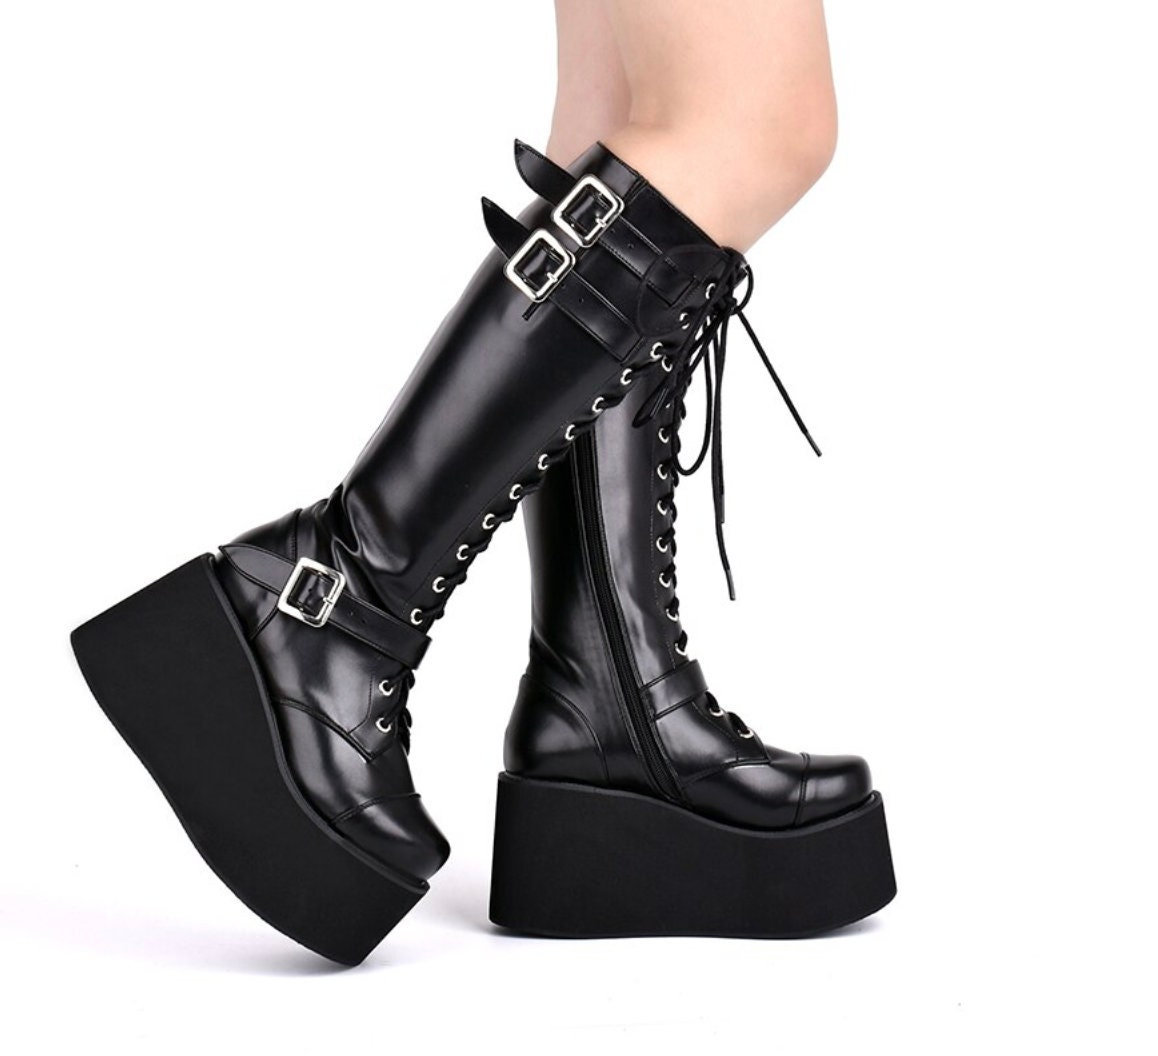 Y2K Punk Boots with Lace-Up Zipper, High Heel Platform, and Round Toe